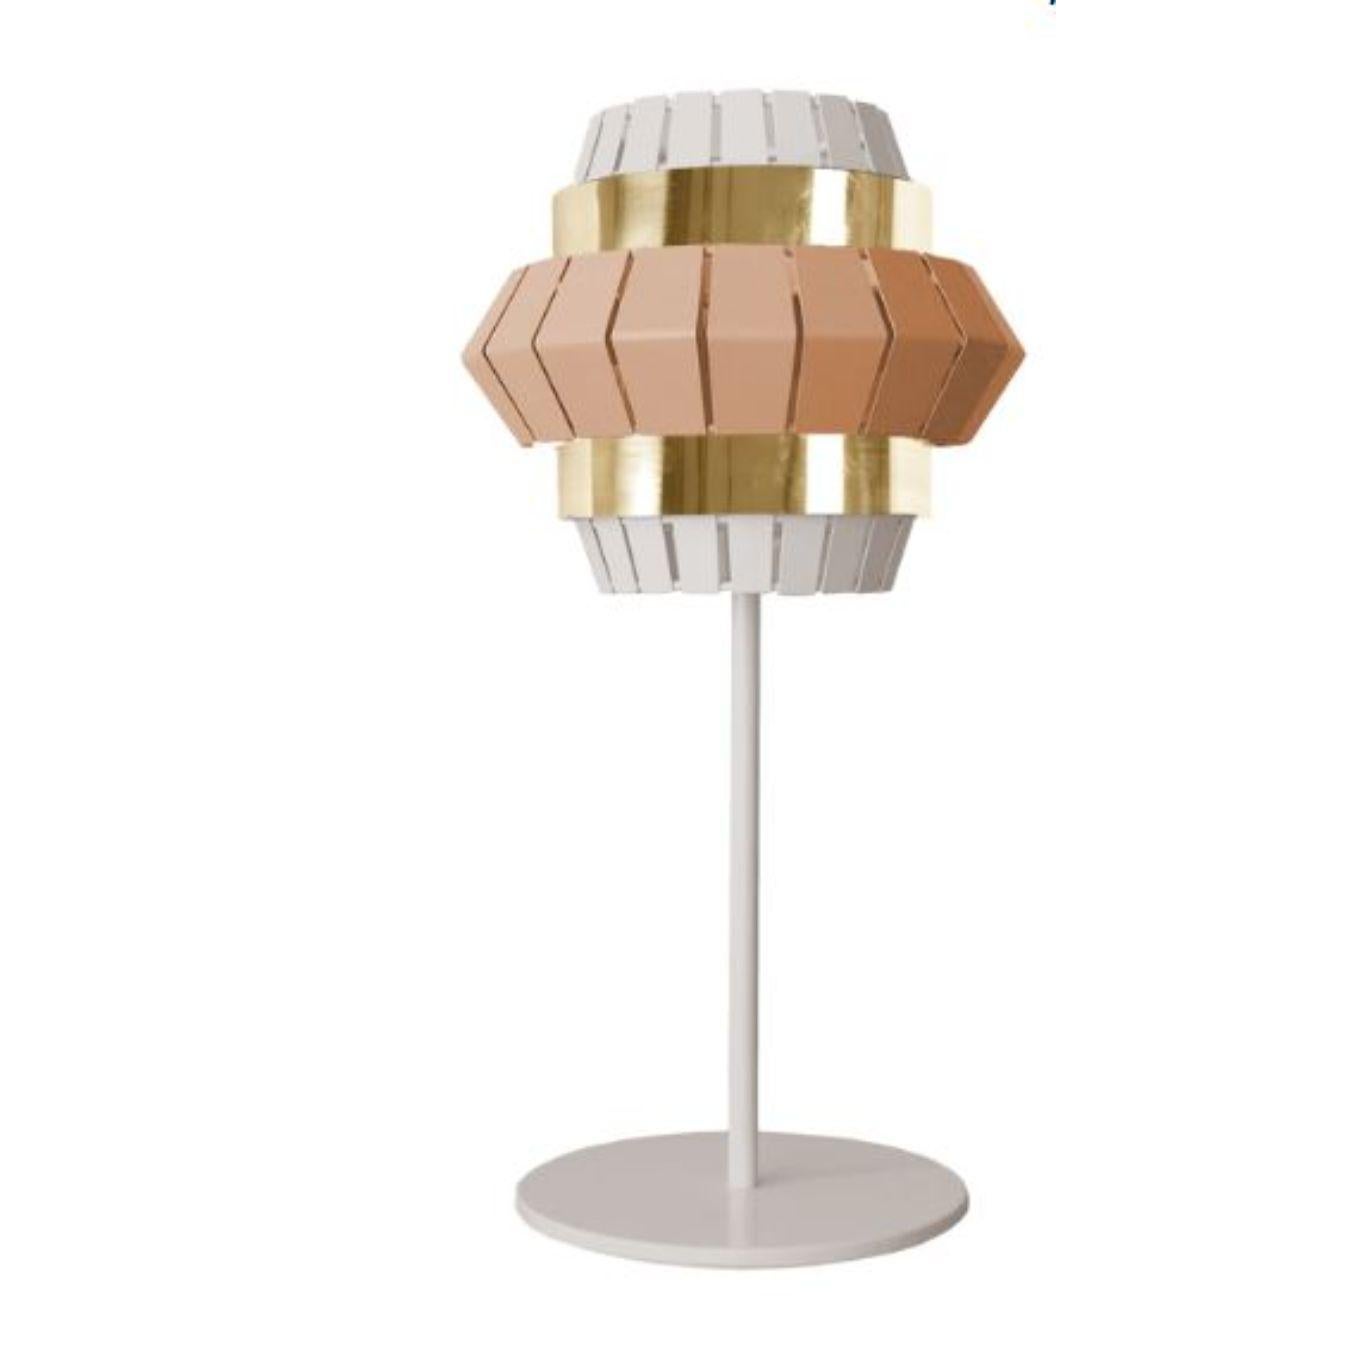 Ivory and Salmon comb table lamp with brass ring by Dooq
Dimensions: W 25.5 x D 25.5 x H 60 cm
Materials: lacquered metal, polished brass.
Also available in different colors and materials.

Information:
230V/50Hz
E14/1x20W LED
120V/60Hz
E12/1x15W